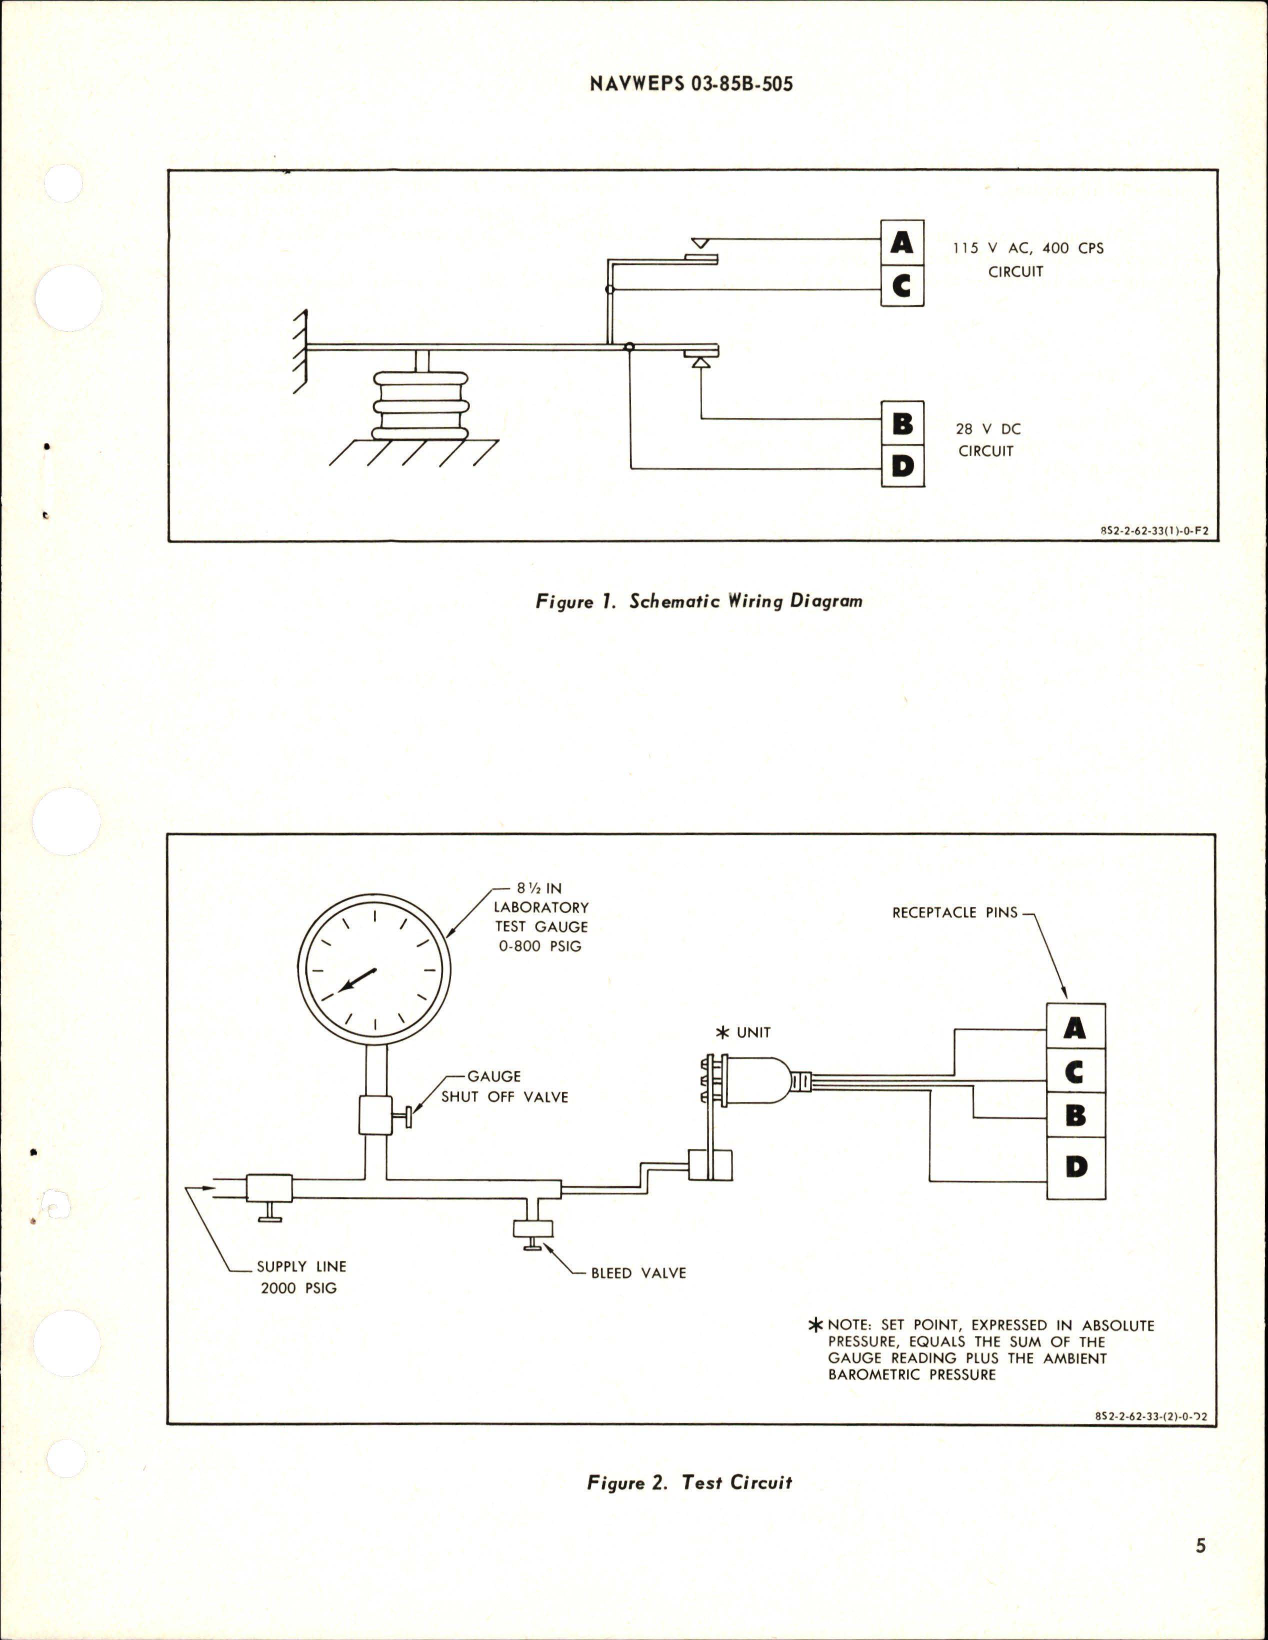 Sample page 5 from AirCorps Library document: Overhaul Instructions with Parts for AB Ignition Fluid Pressure Switch Assembly - Specification 336C155P1 - Part CG12166